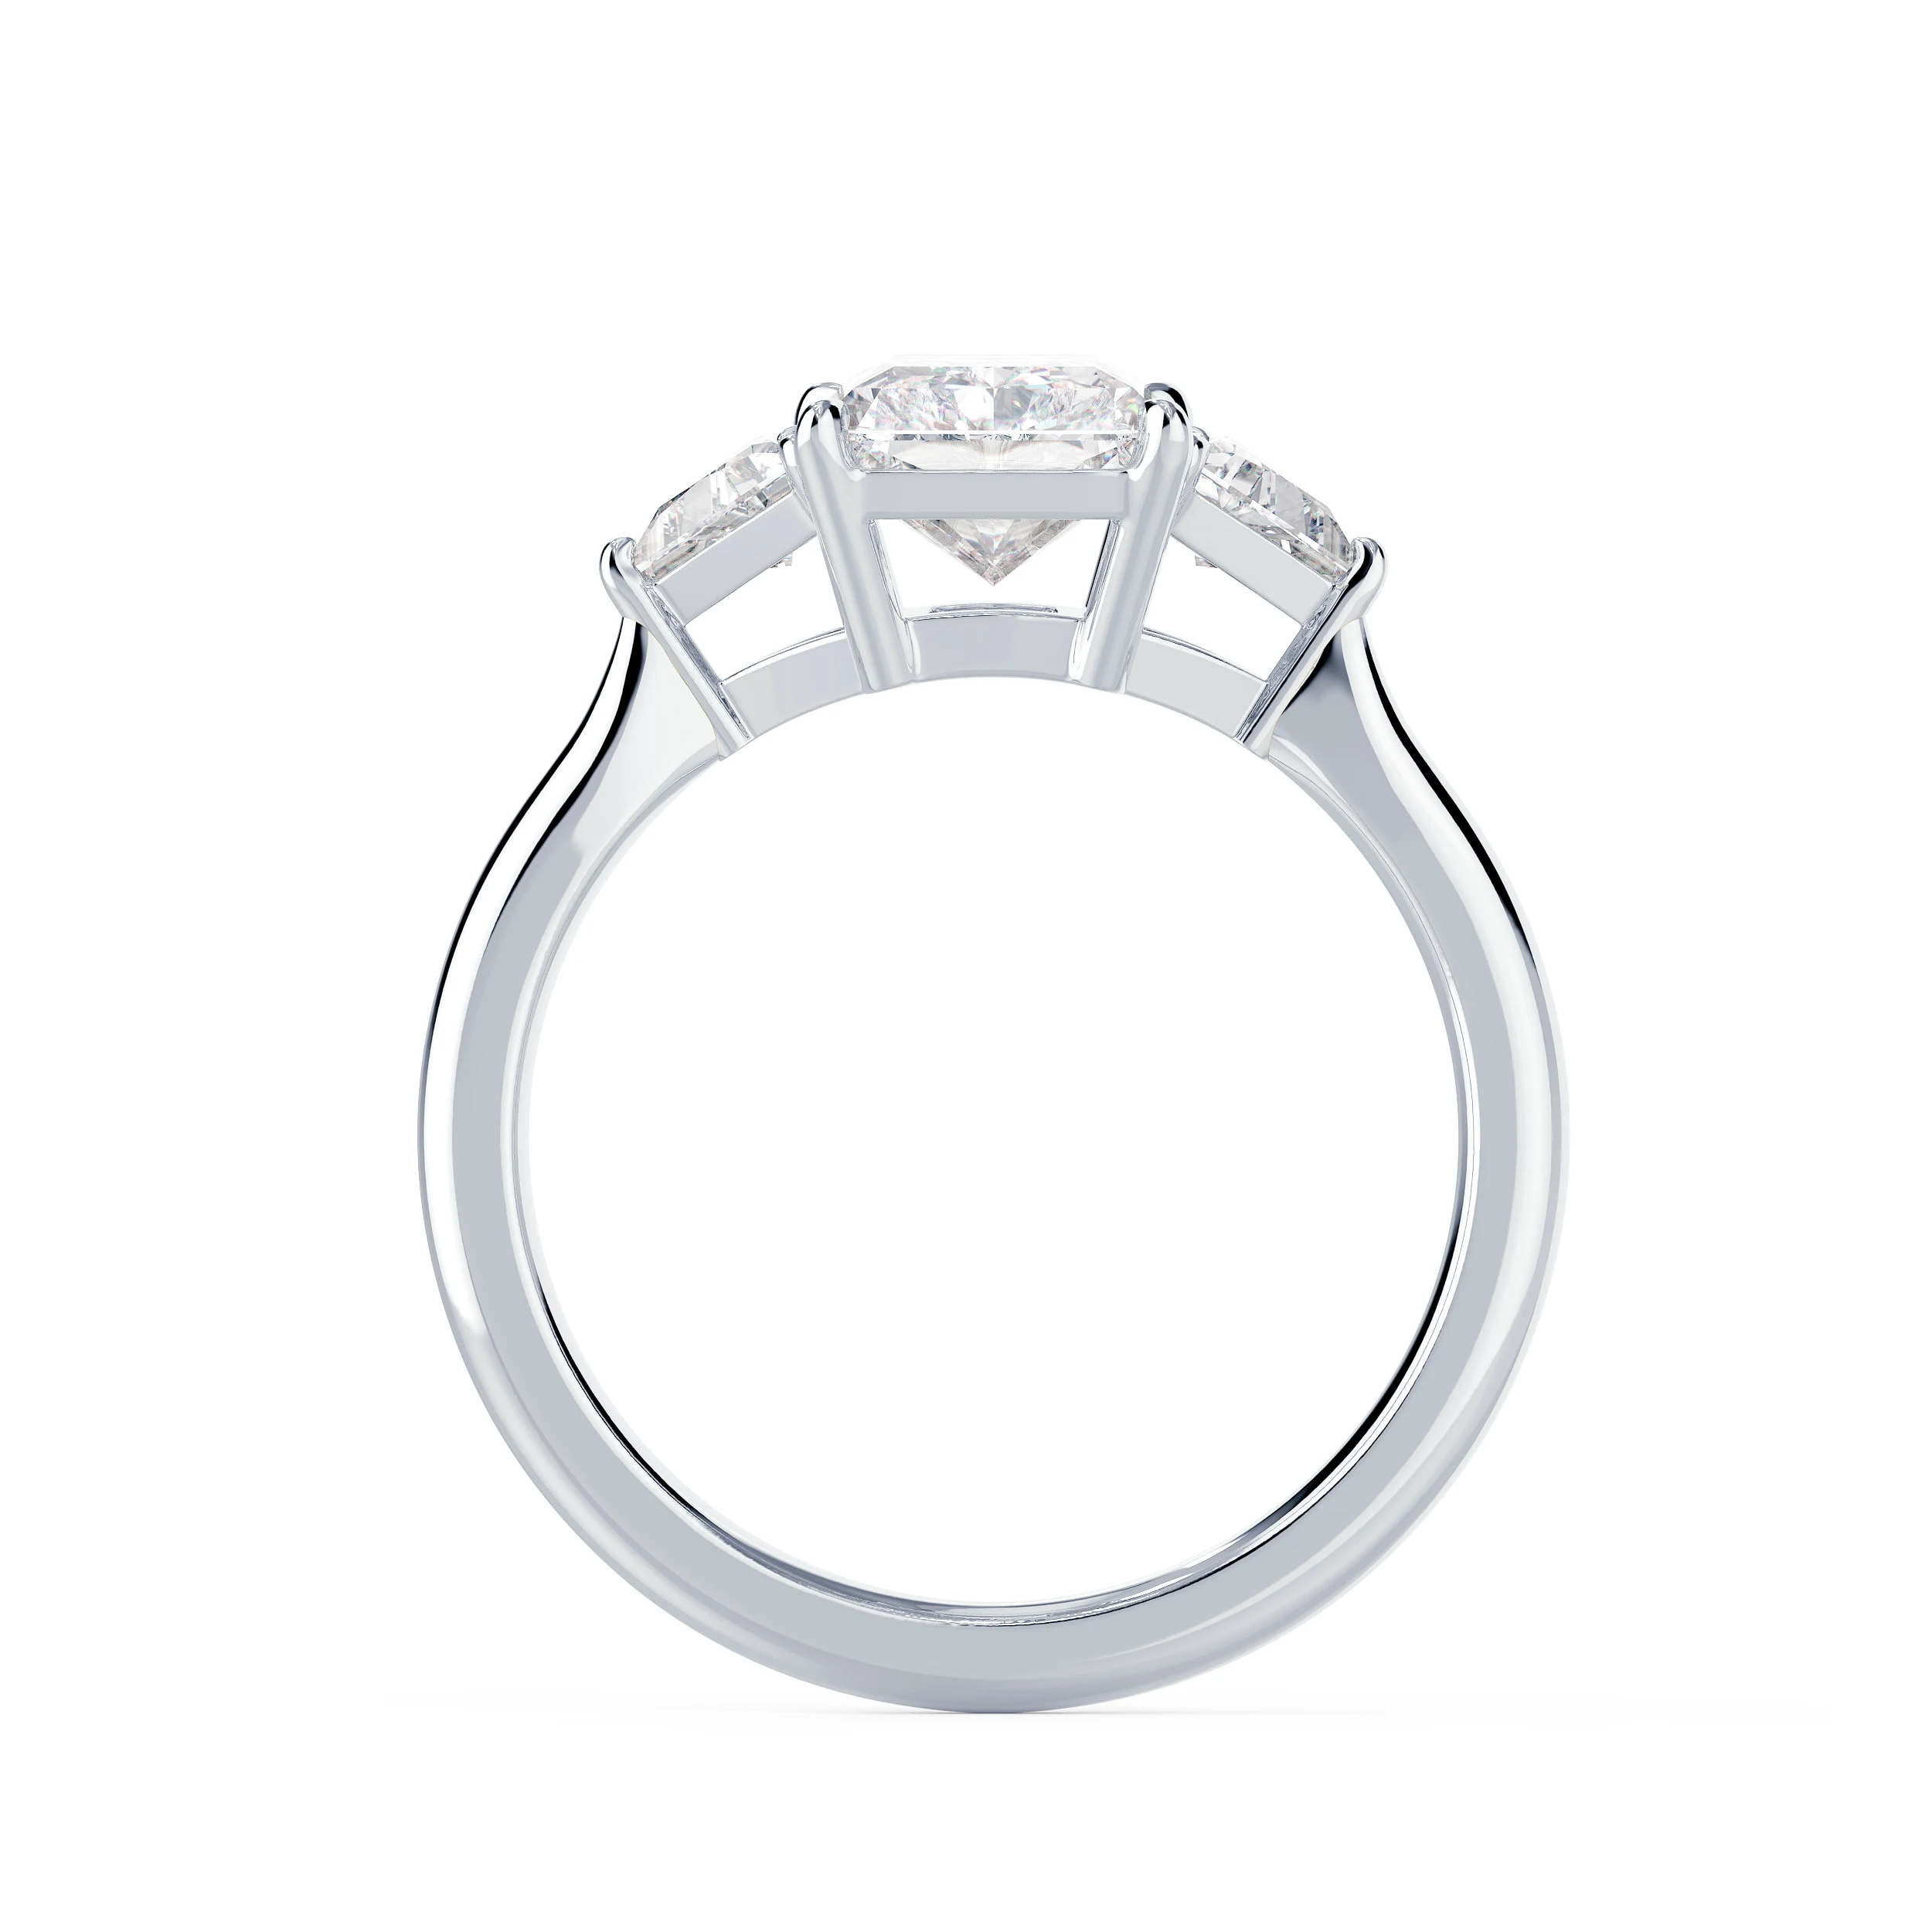 Diamonds set in White Gold Radiant and Trillion Setting (Profile View)